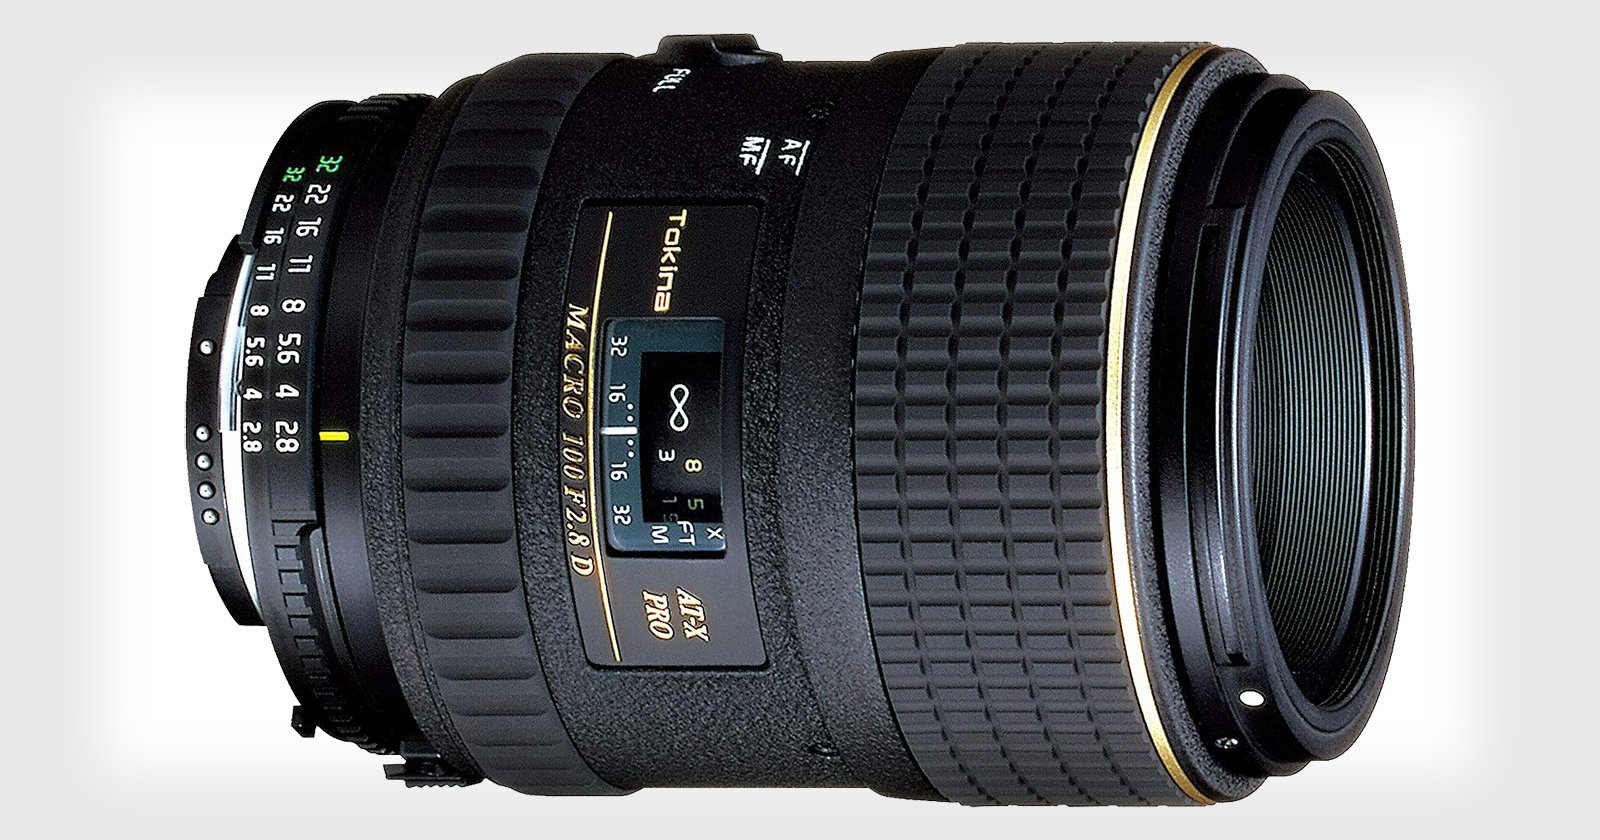 Tokina to Release a New 100mm f/2.8 Macro Lens for Canon and Nikon DSLRs Very Soon